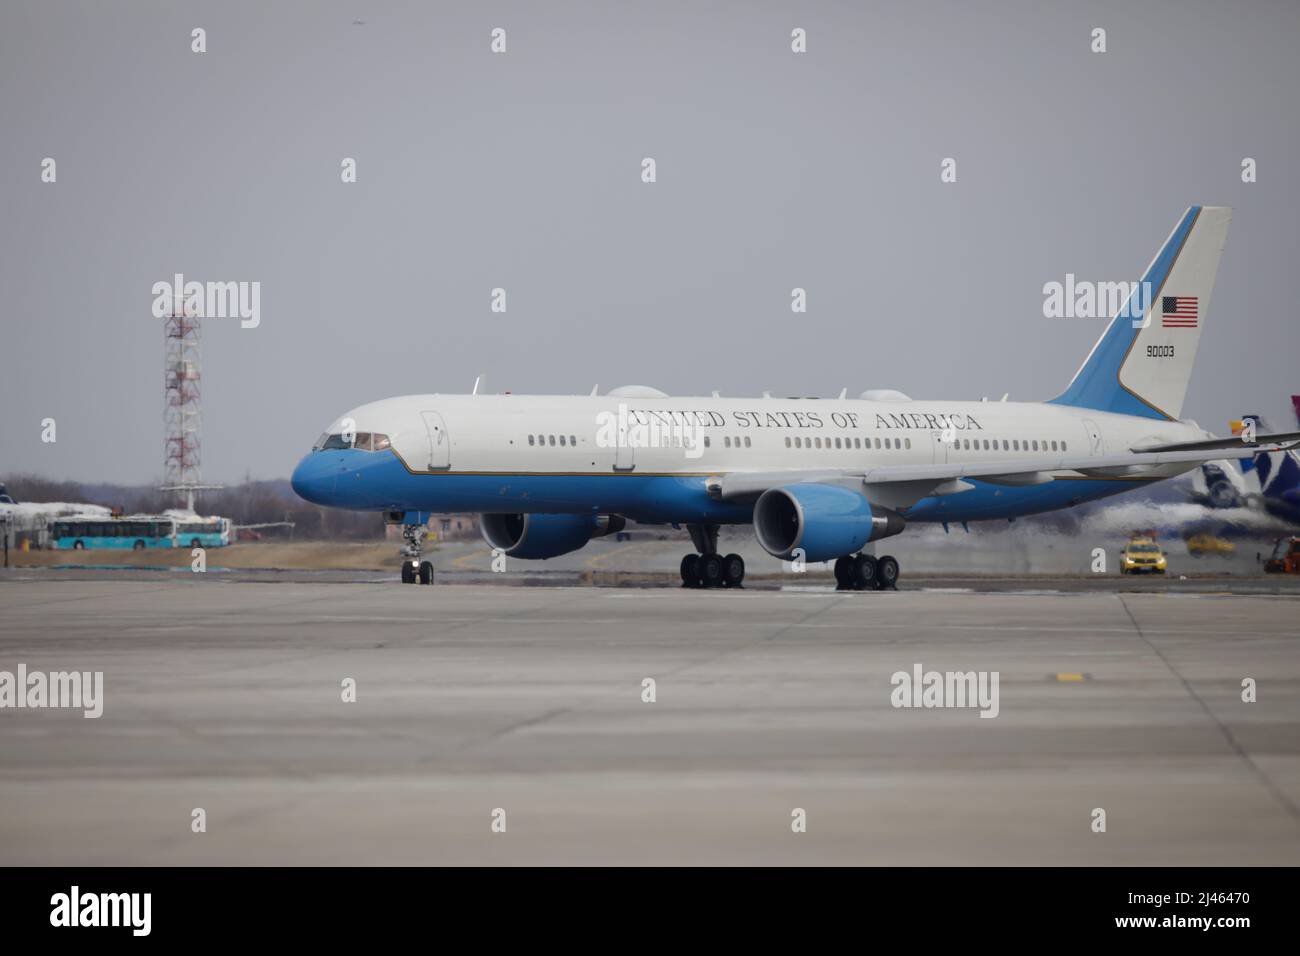 Otopeni, Romania - March 11, 2022: Air Force 2 plane, the United States Air Force aircraft carrying the U.S. vice president. Stock Photo